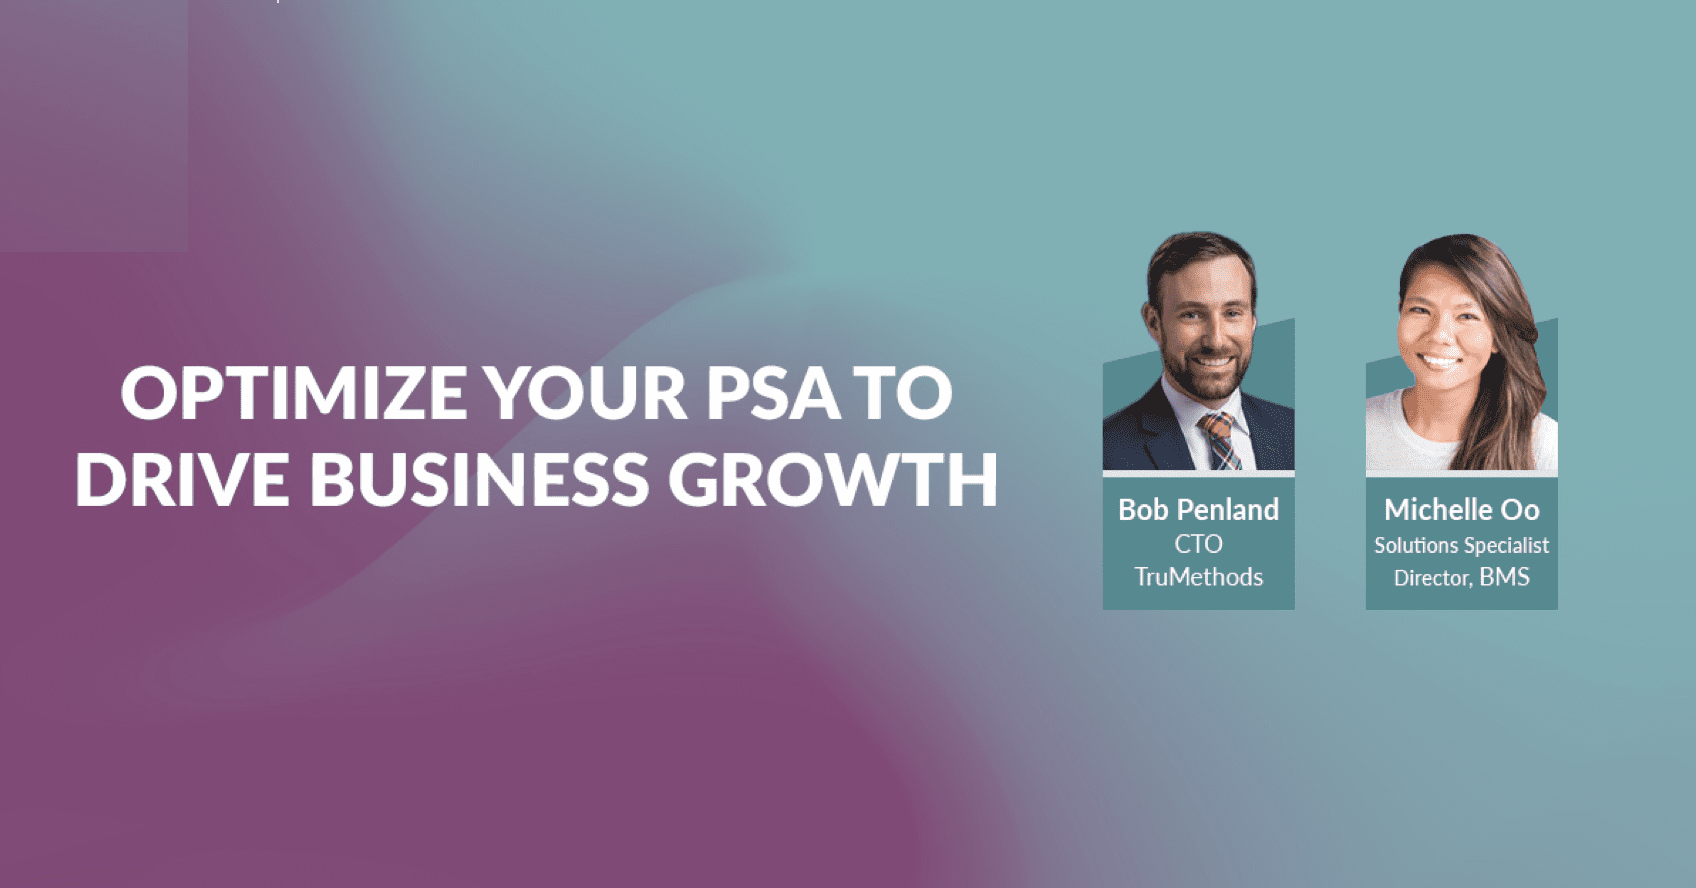 3-Ways-to-Optimize-Your-PSA-to-Drive-Business-Growth